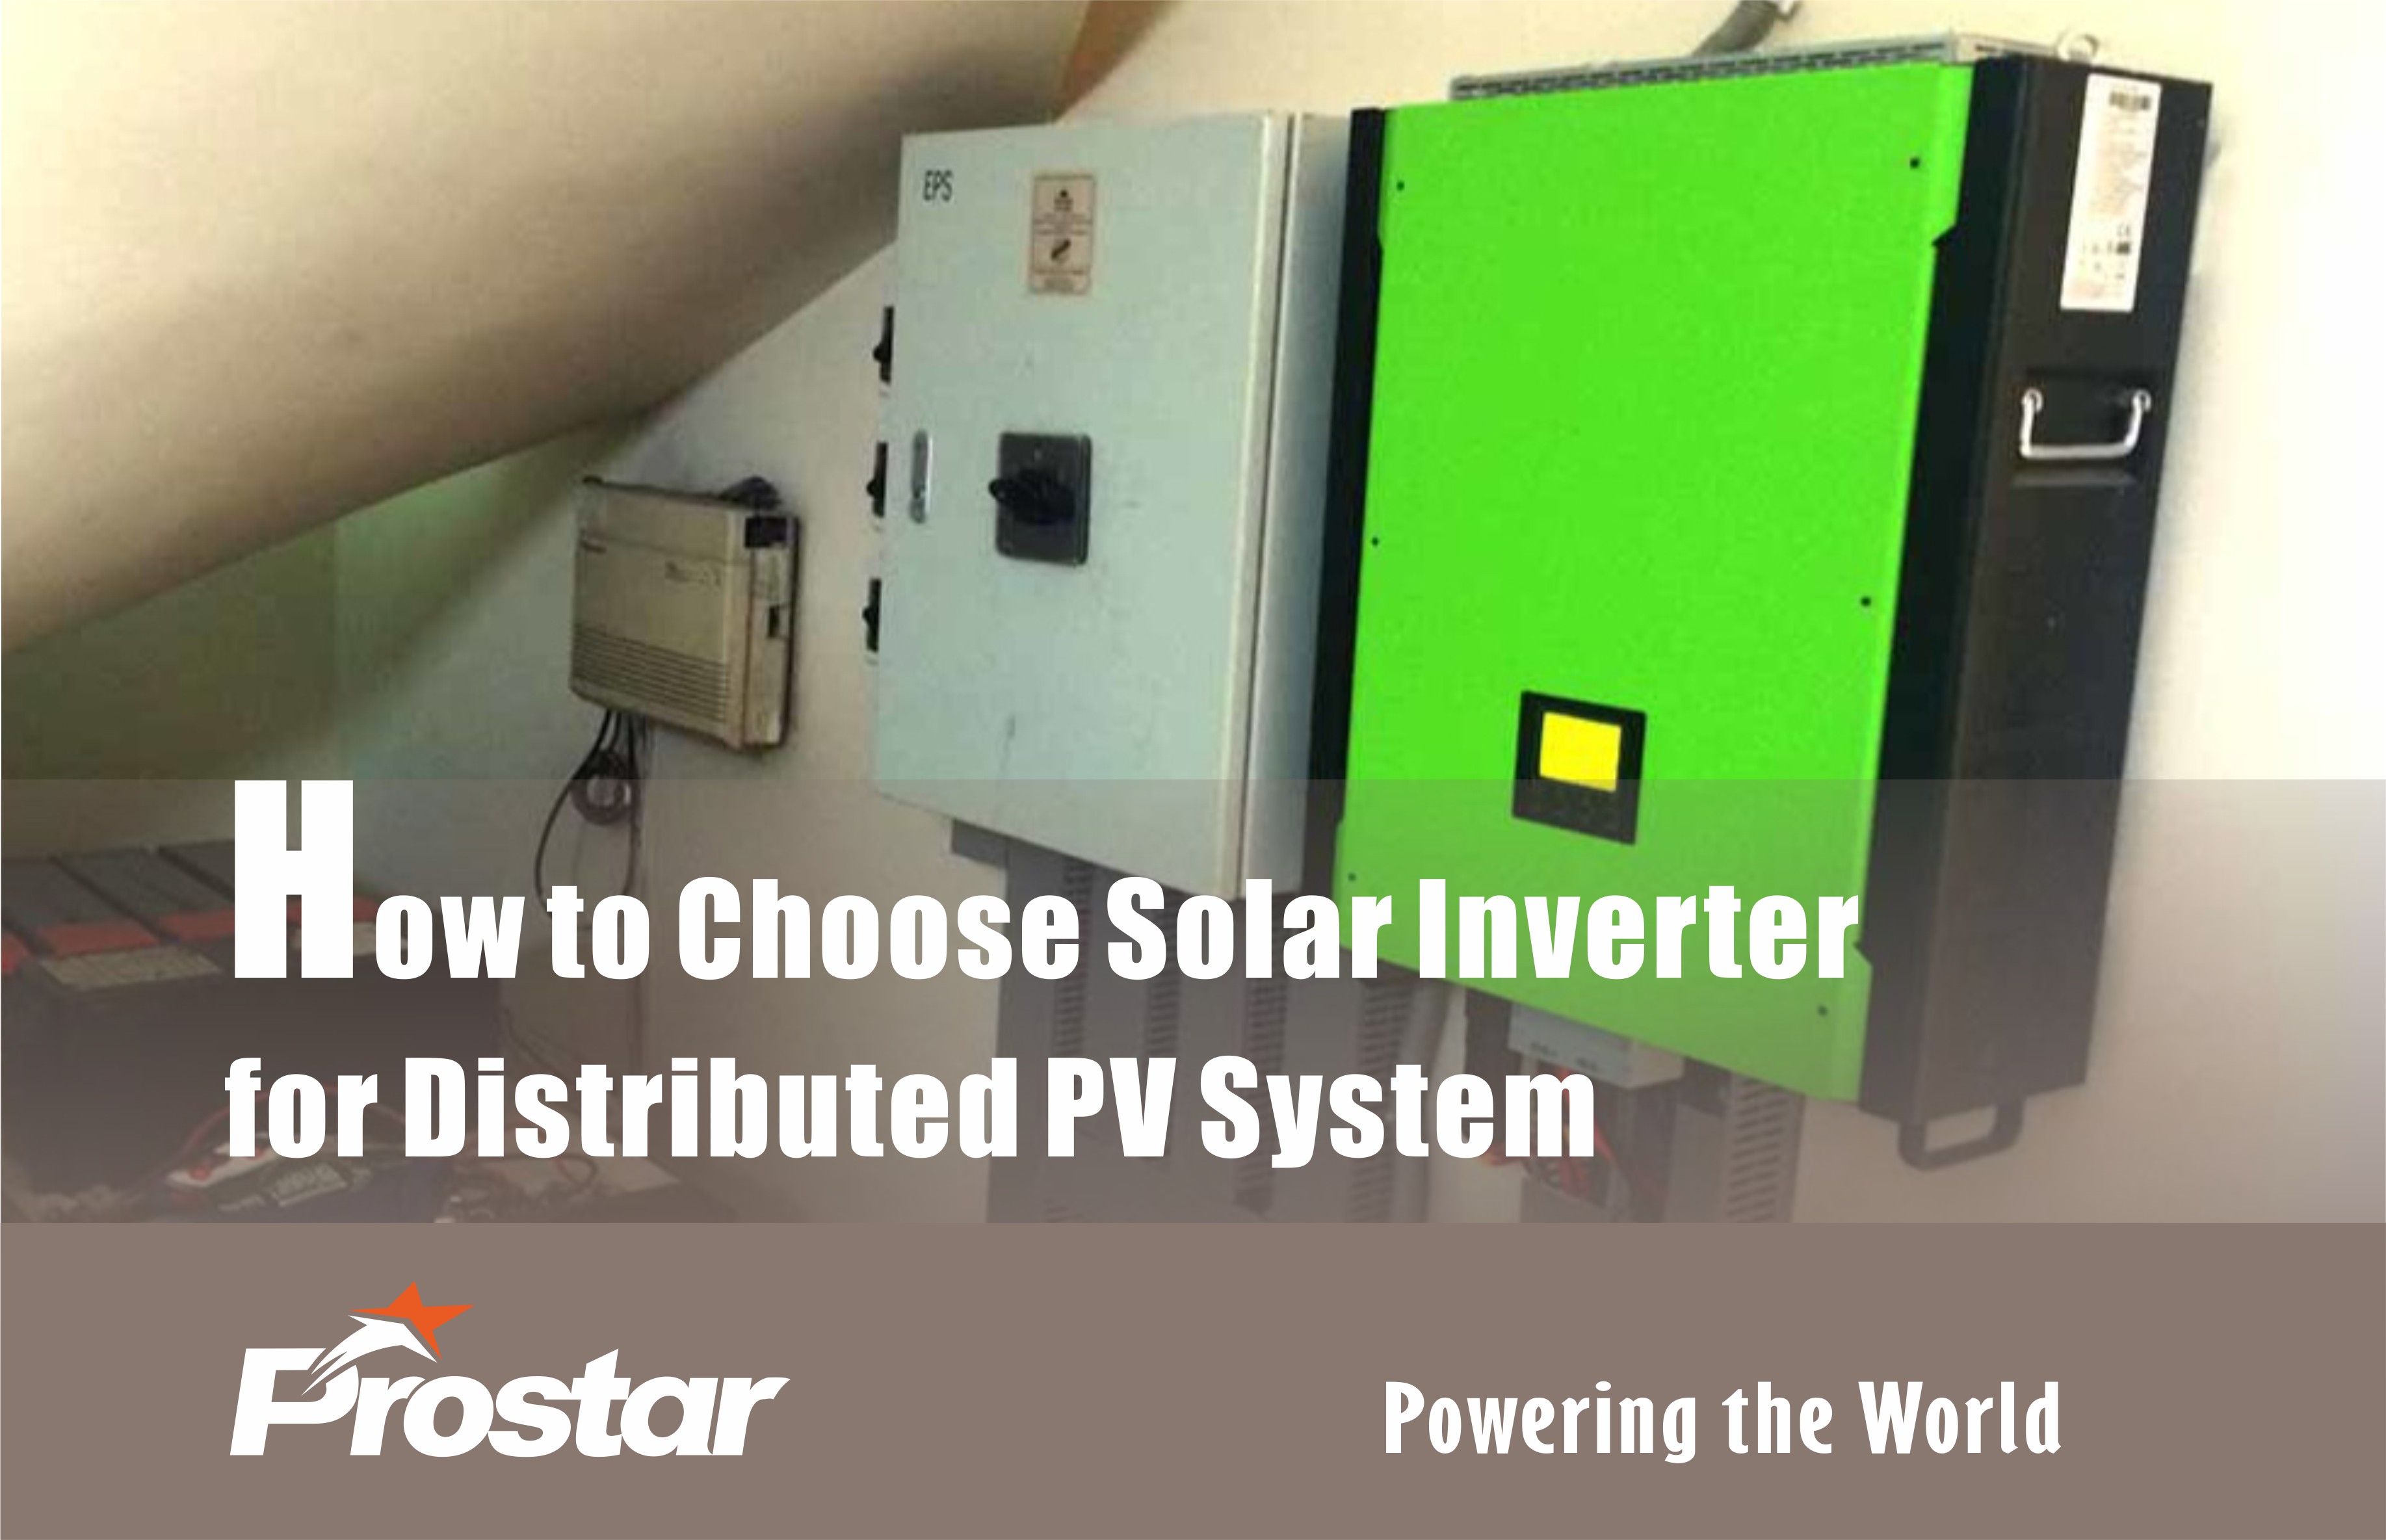 How to Choose Solar Inverter for Distributed PV System